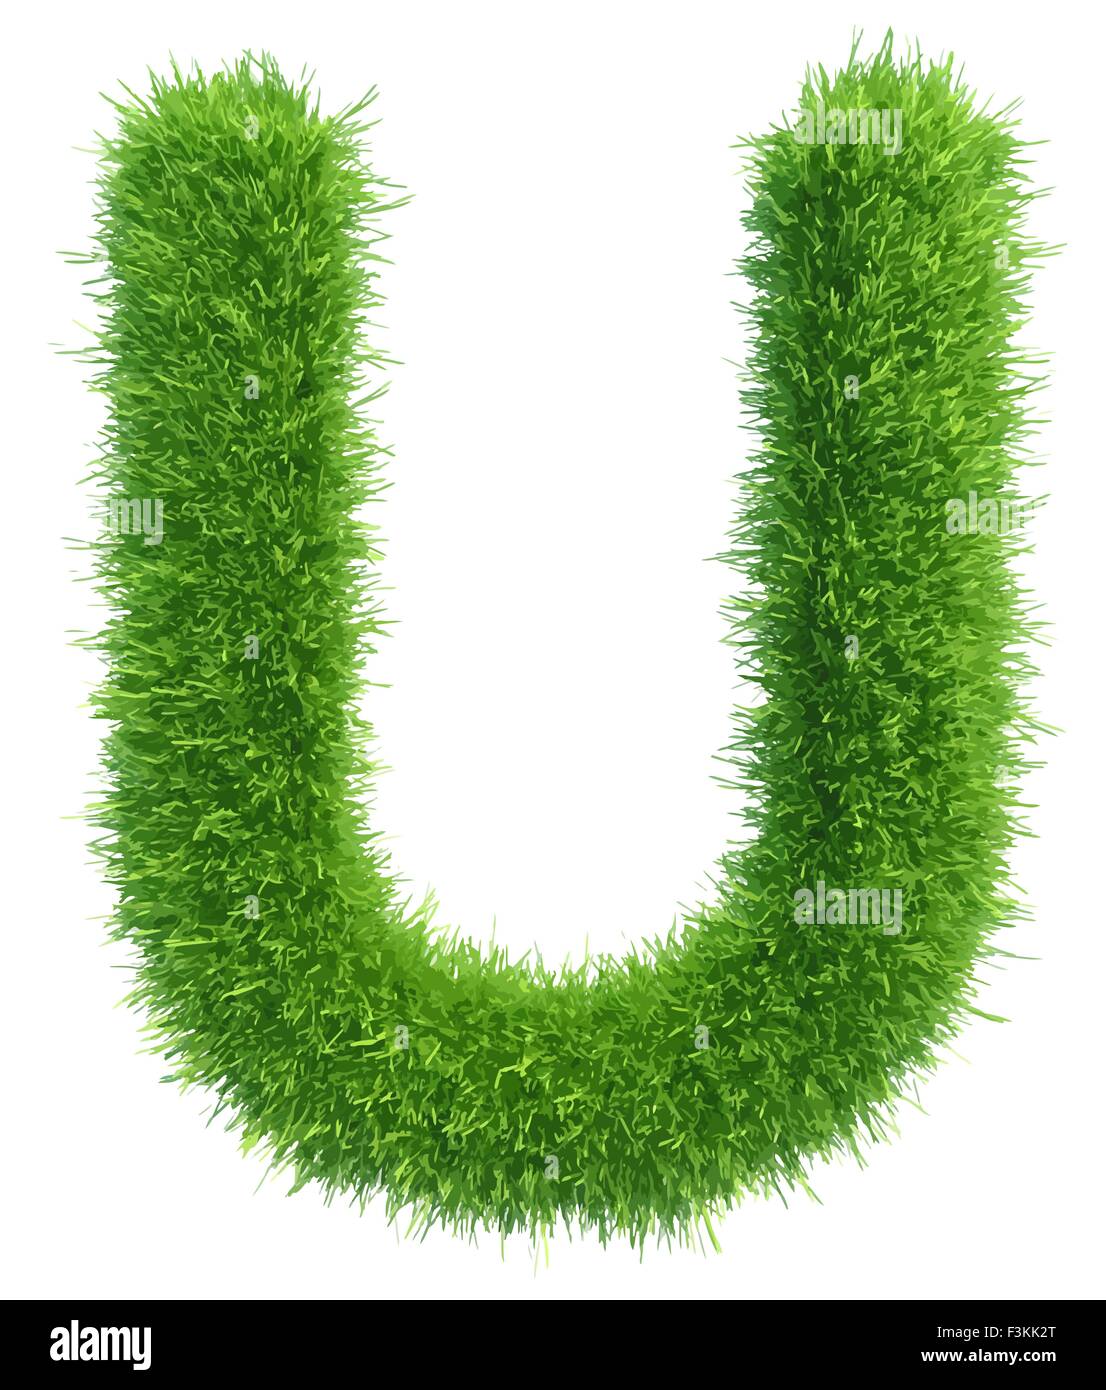 Vector capital letter U from grass on white background Stock Vector